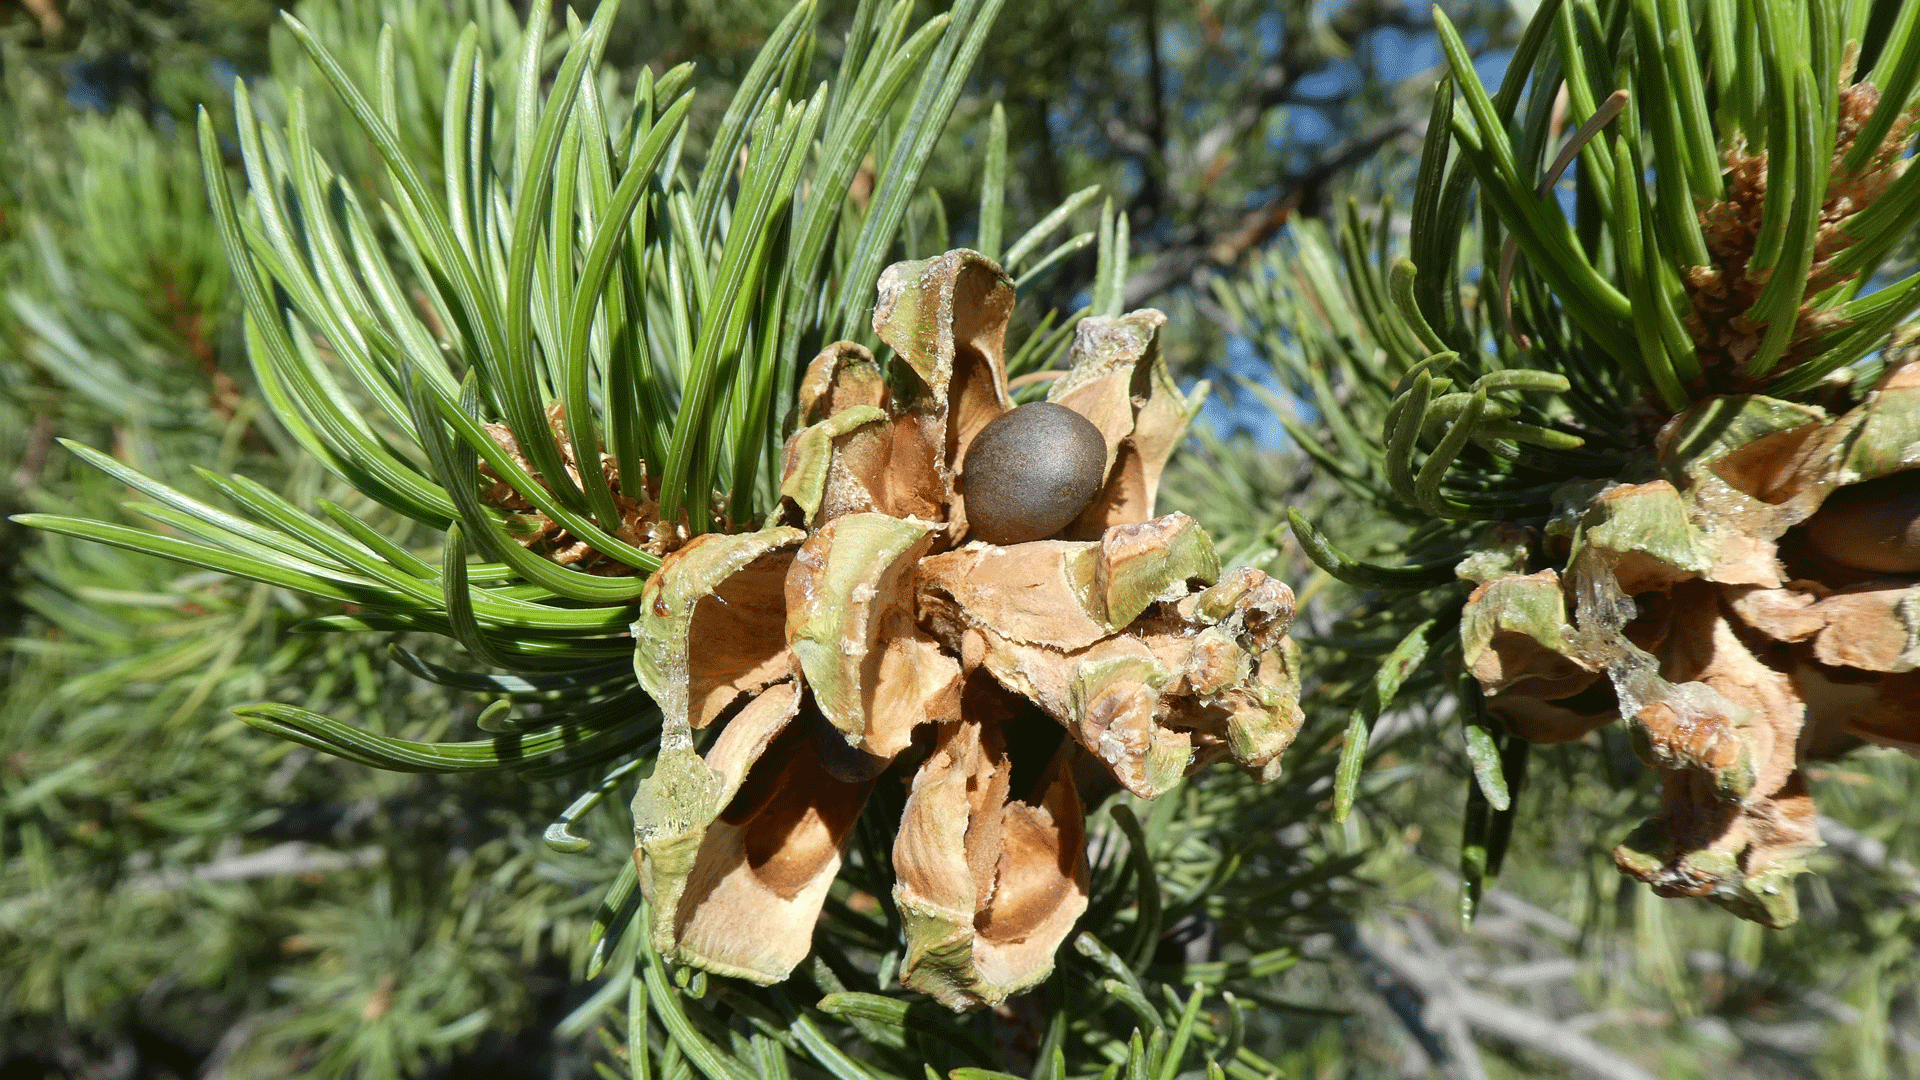 Open cone with remaining nut, Sandia Mountains, September 2020